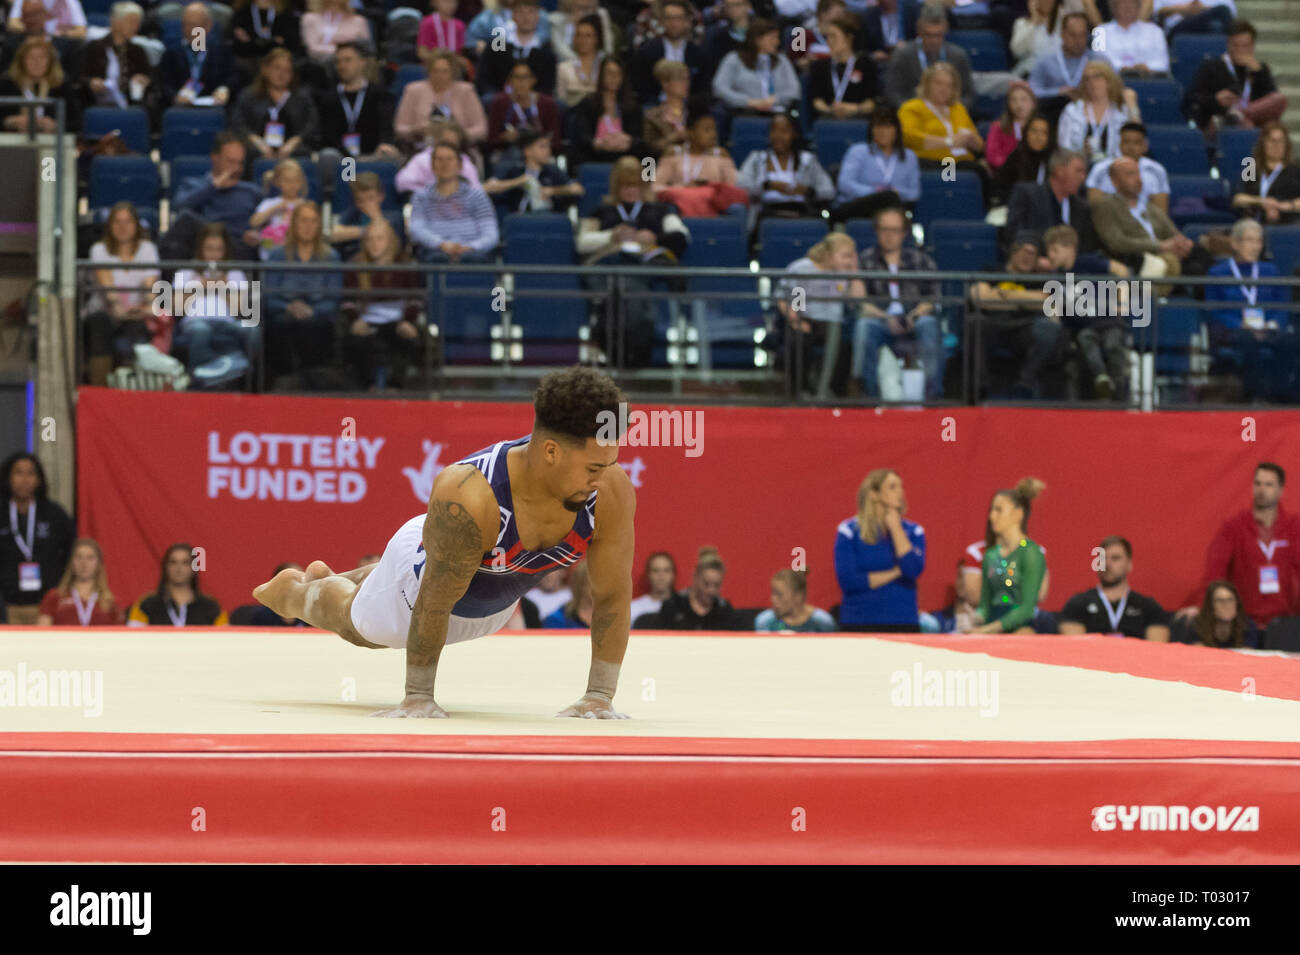 Liverpool, UK. 17th March 2019. Reiss Beckford of South Essex Gymnastics competing at the Men’s and Women’s Artistic British Championships 2019, M&S Bank Arena, Liverpool, UK. Stock Photo